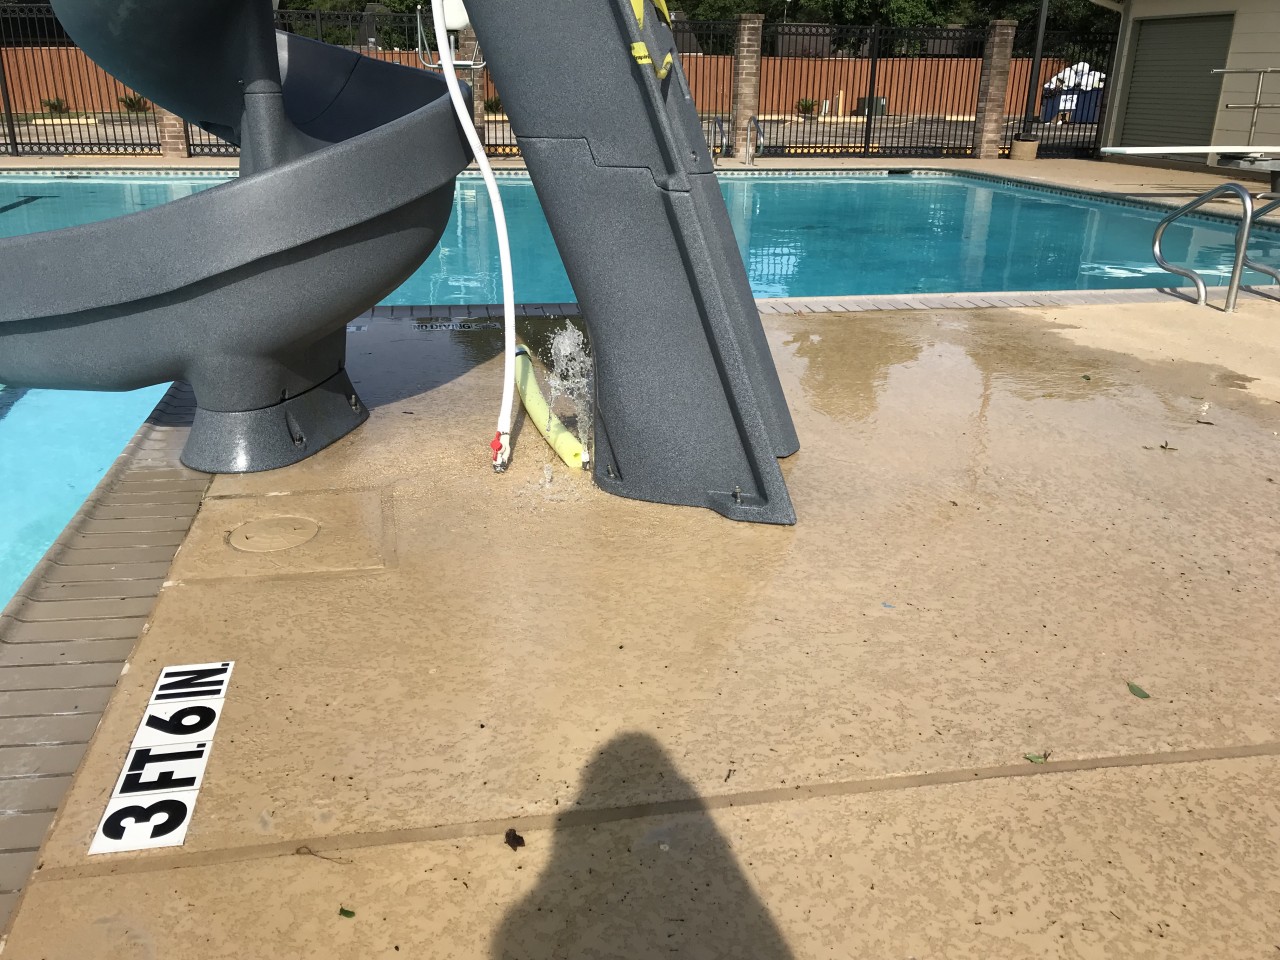 Plumbing Issue at Cimarron Parkway Pool, Monday, June 4th